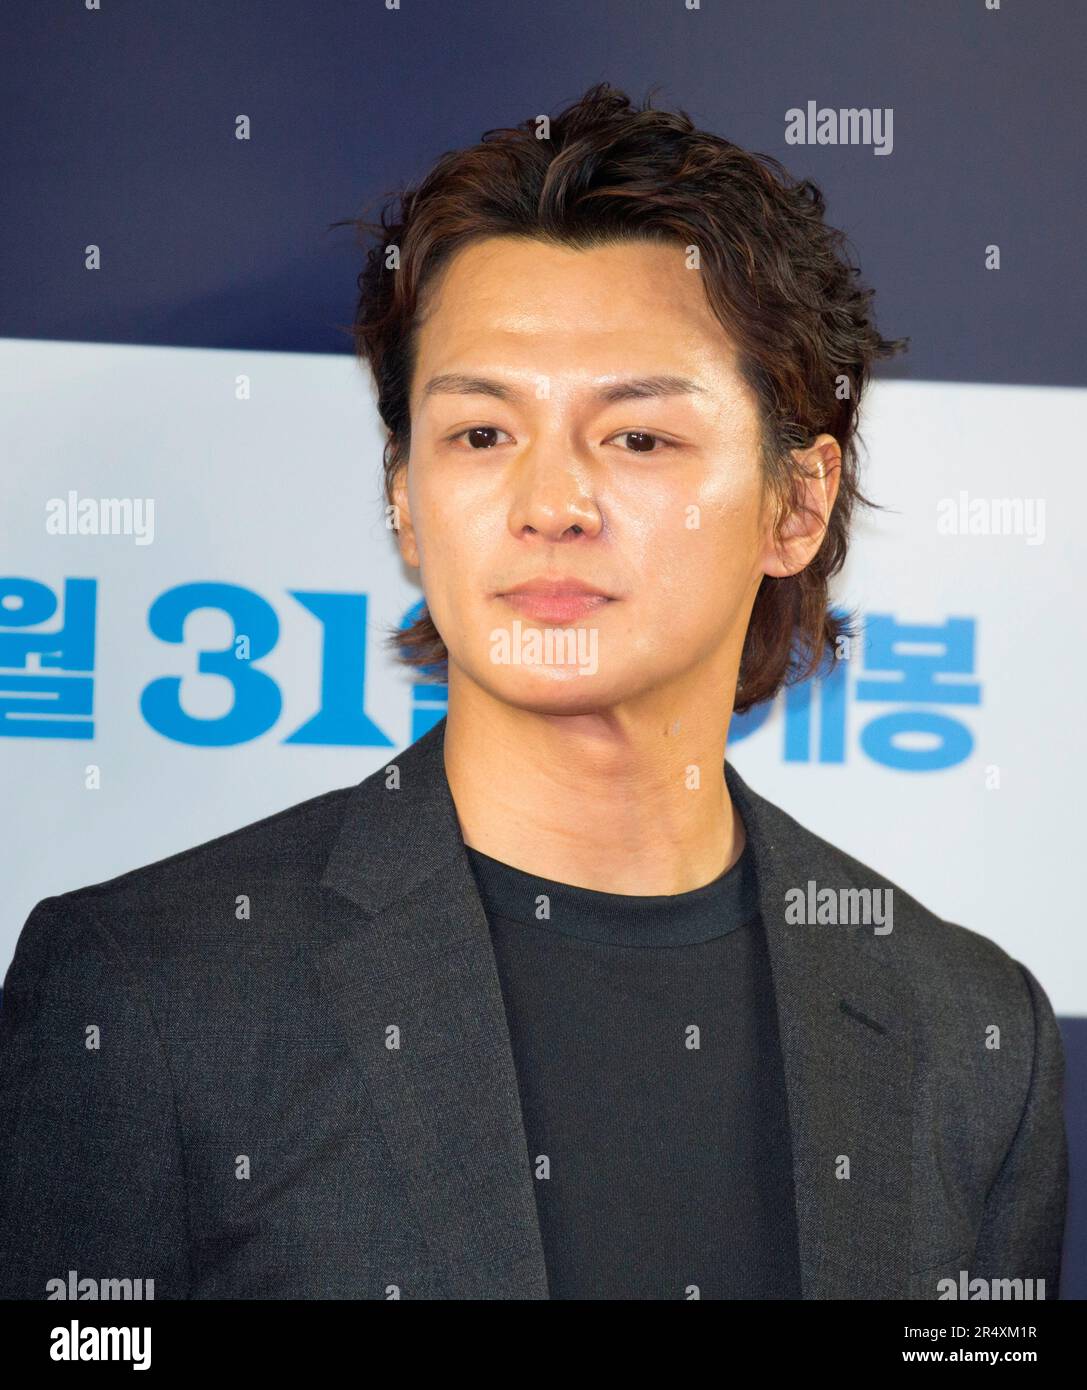 Choi Dong-Goo, May 22, 2023 : South Korean actor Choi Dong-Goo attends a photocall before a VIP preview of South Korean movie 'The Roundup: No Way Out' in Seoul, South Korea. 'The Roundup: No Way Out', the third installment of 'The Outlaws' series will hit local theaters on May 31. Credit: Lee Jae-Won/AFLO/Alamy Live News Stock Photo